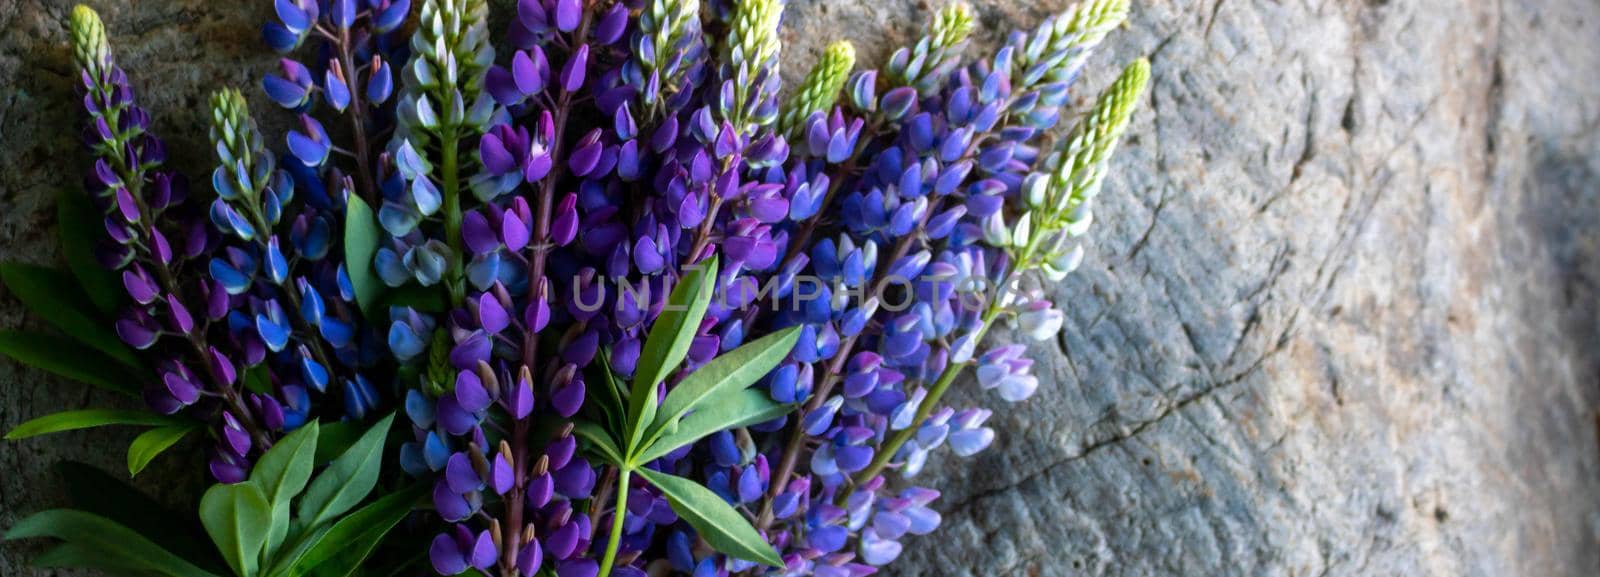 Panorama of a bouquet of lupines isolated against a background of gray stone by lapushka62